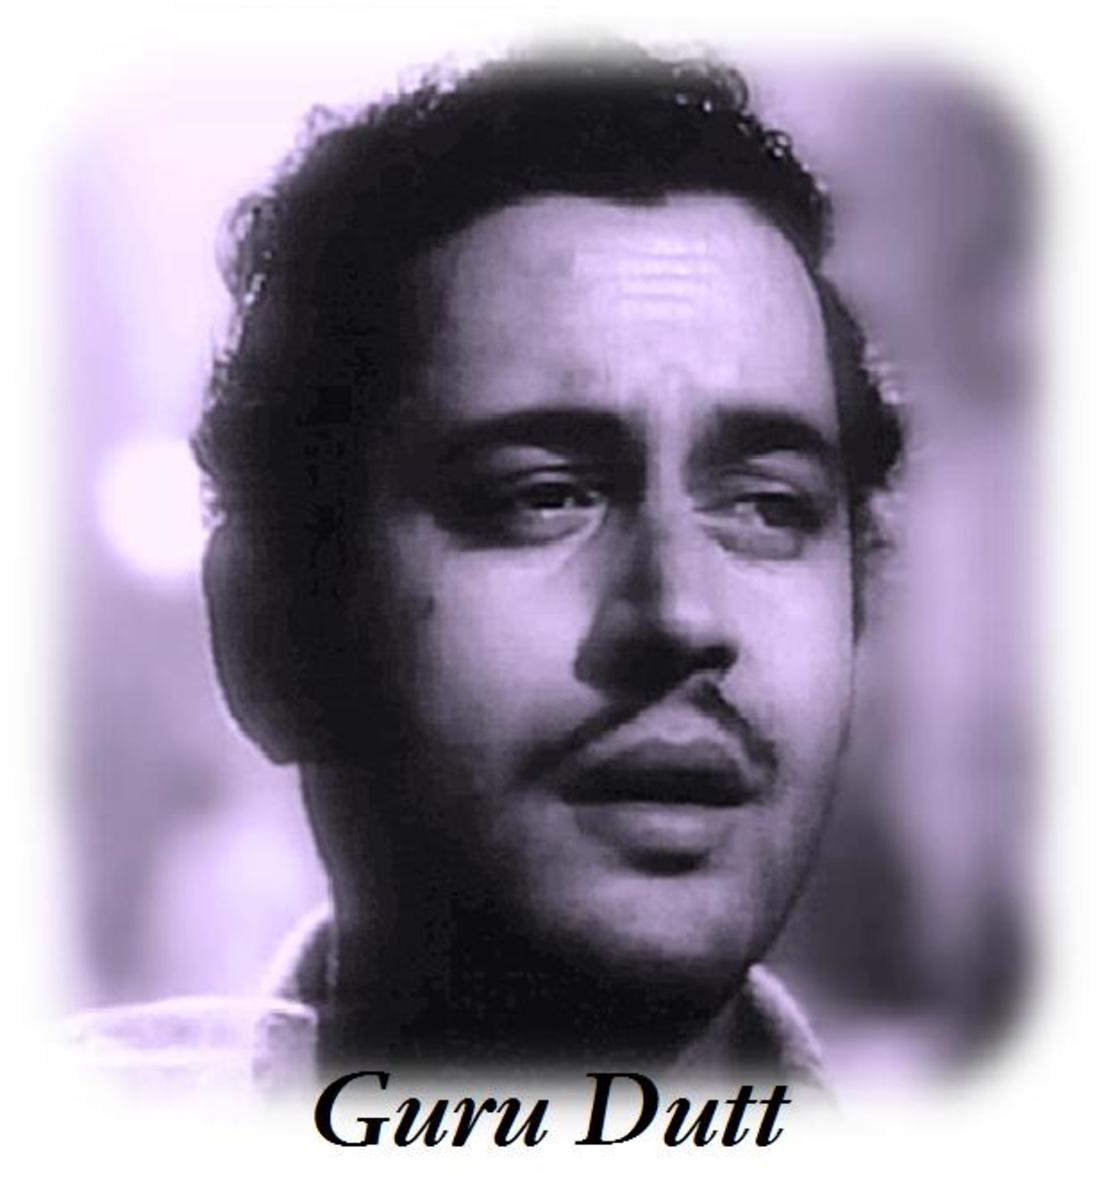 Guru Dutt - A Creative genius who was also a Director and Actor. His movies are eternal masterpieces.